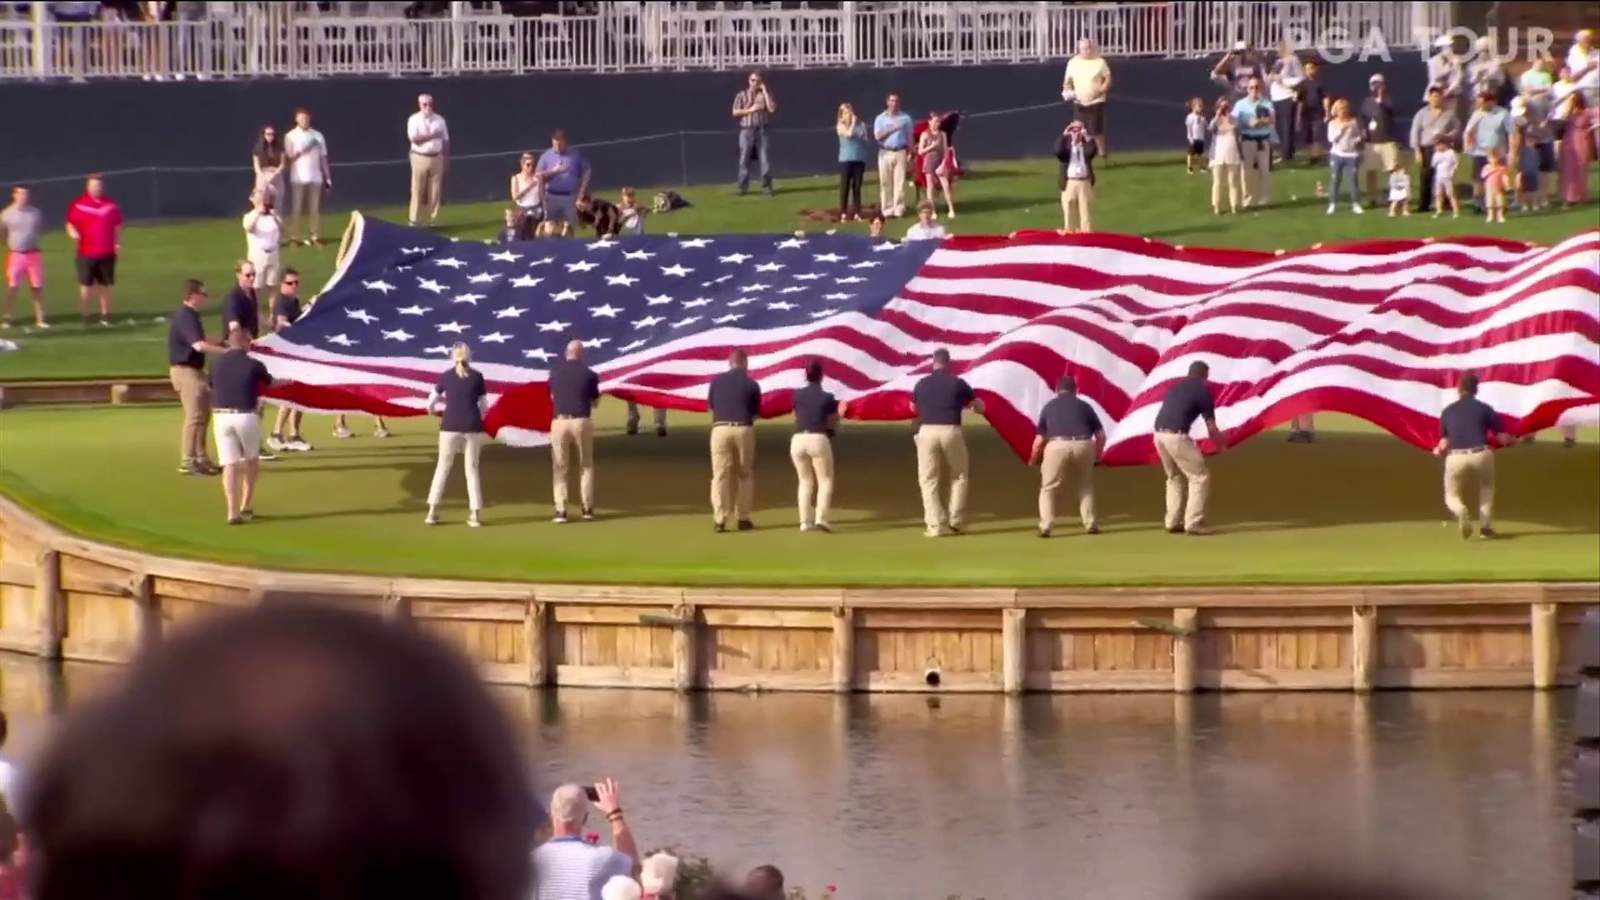 News4Jax teams up with TPC to support local veterans